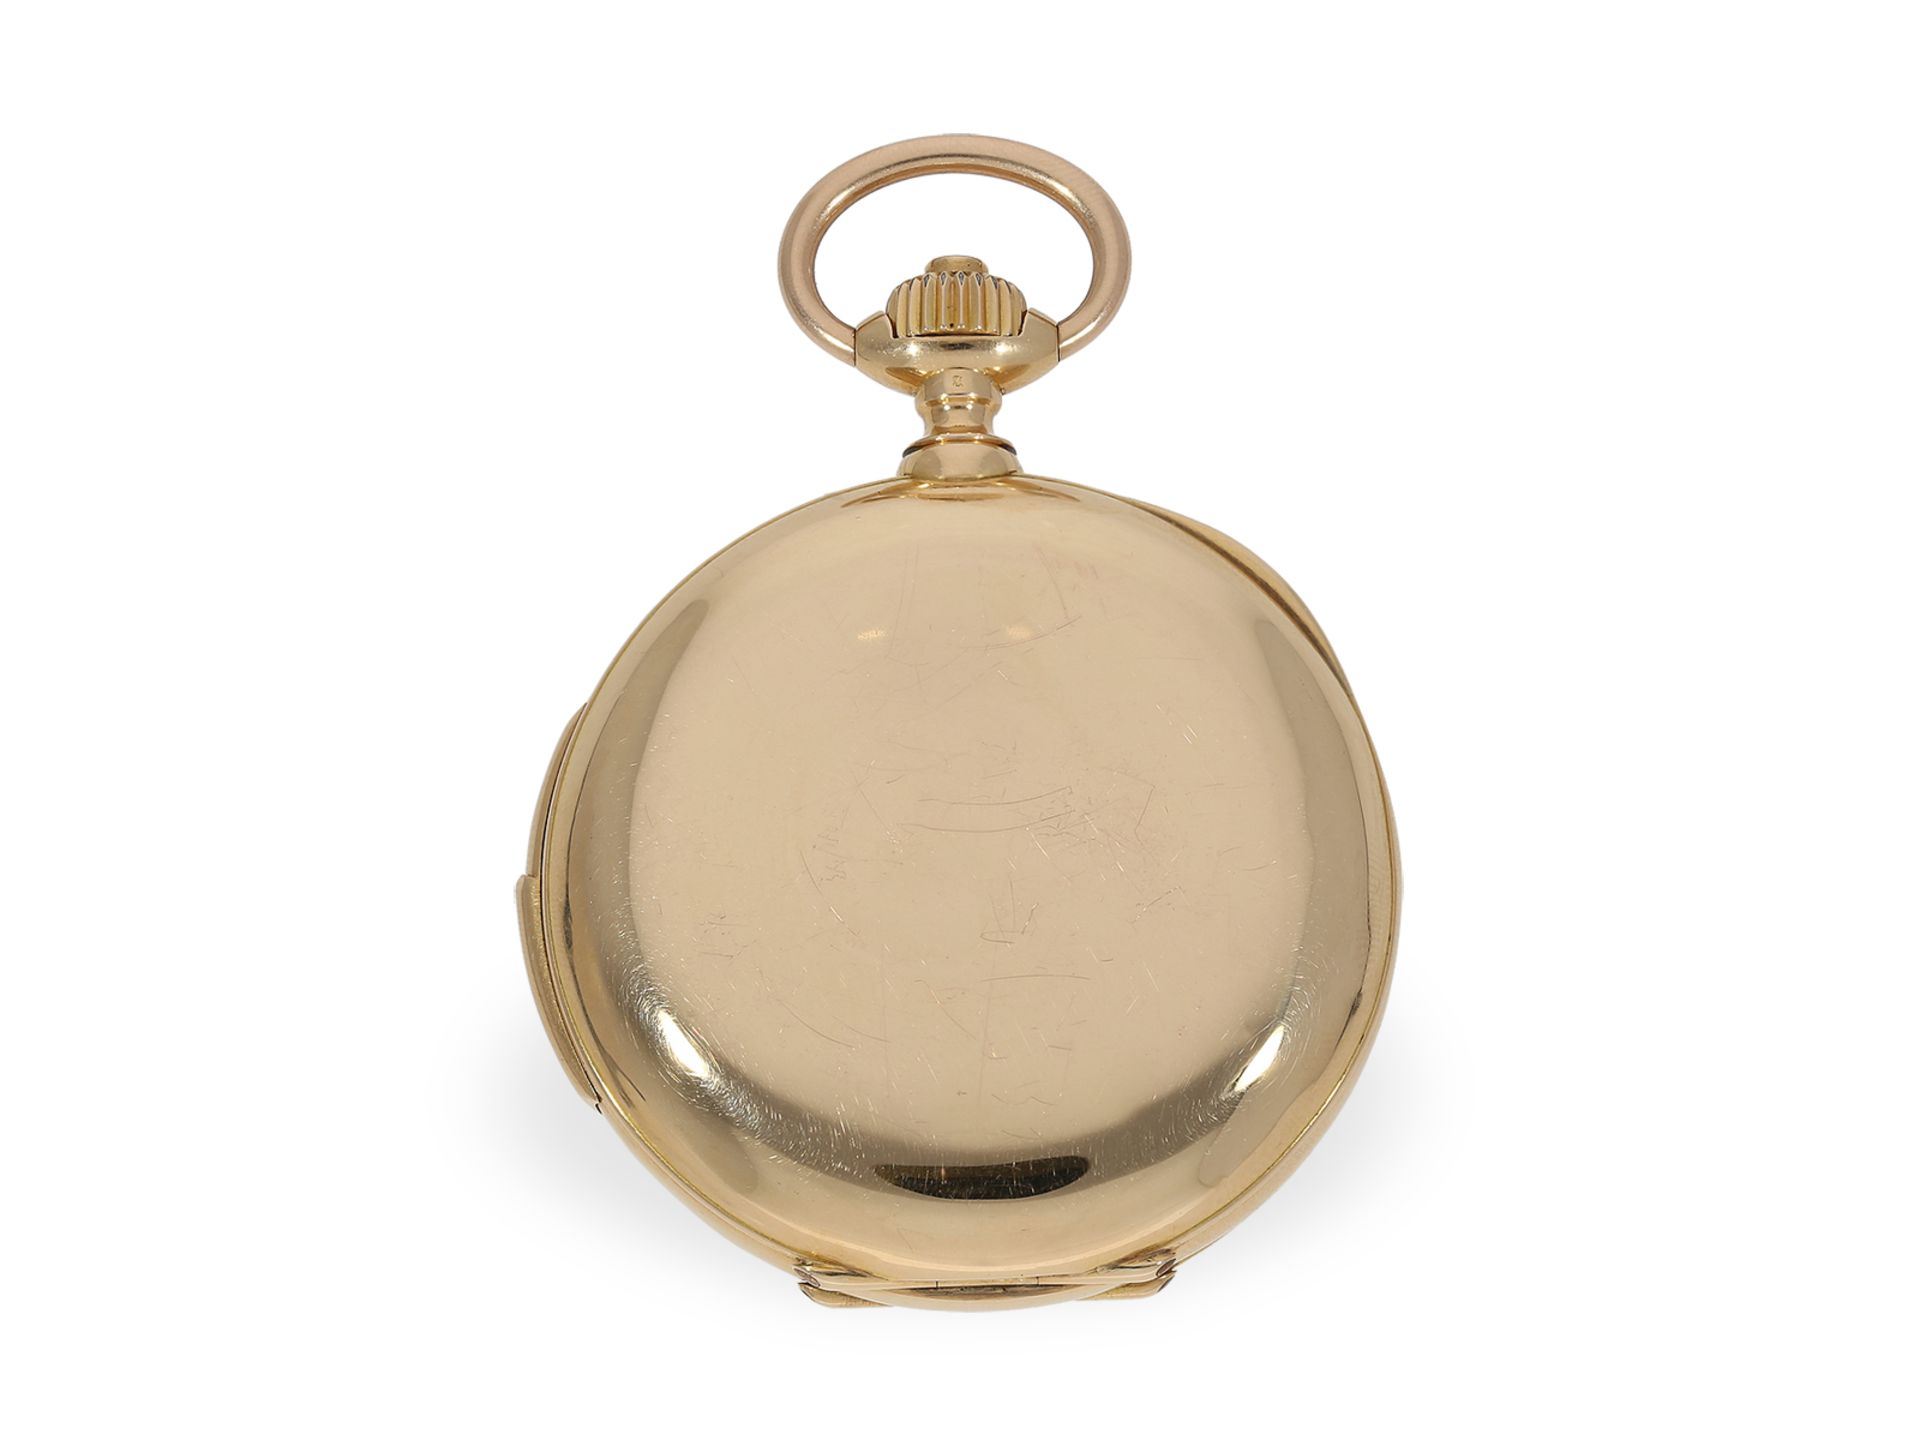 Pocket watch: very fine gold hunting case watch with repeater, probably Audemars Freres, ca. 1880 - Image 7 of 7